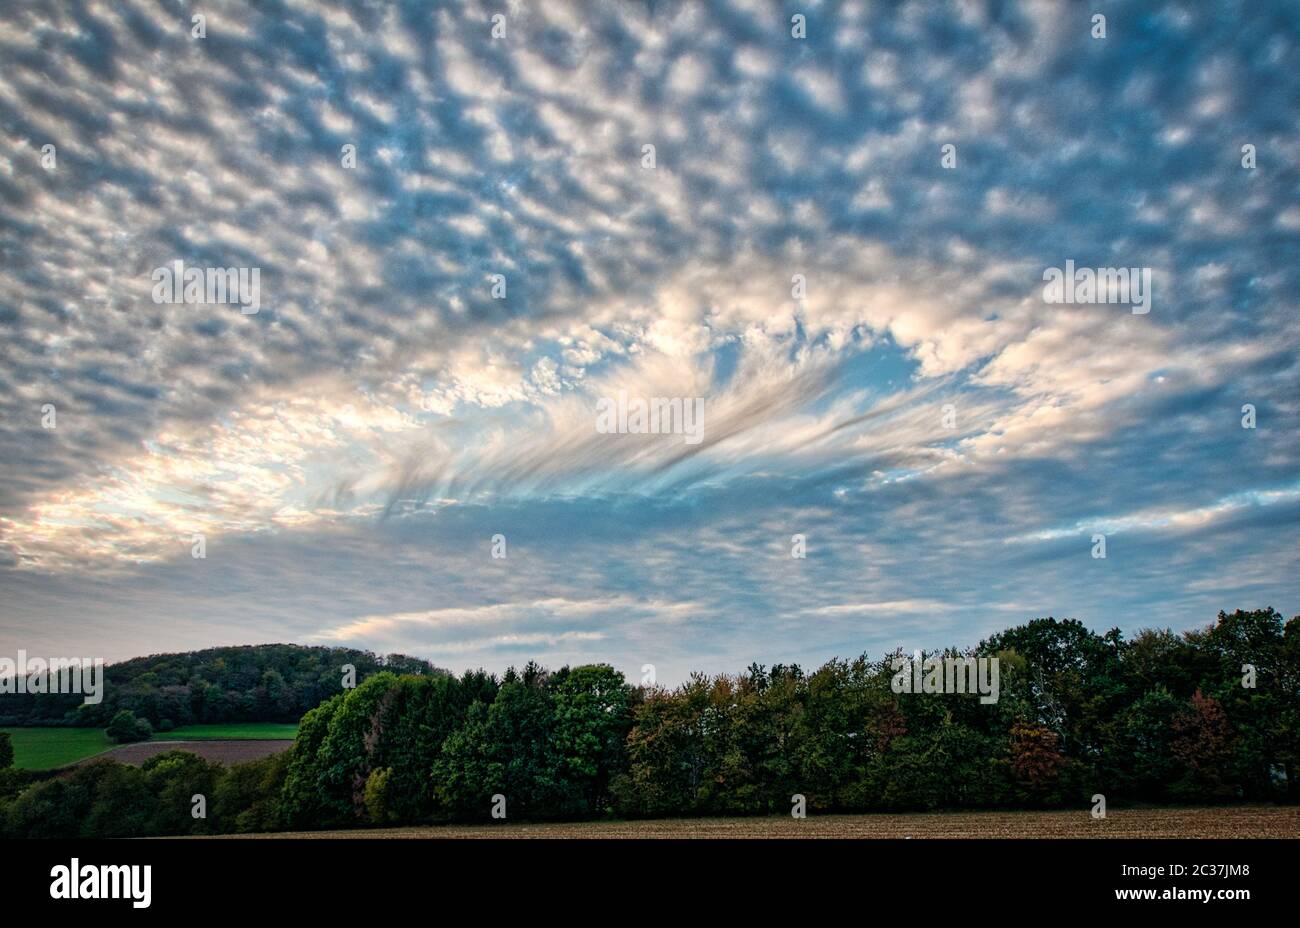 a special hole punch cloud in a blue sky Stock Photo